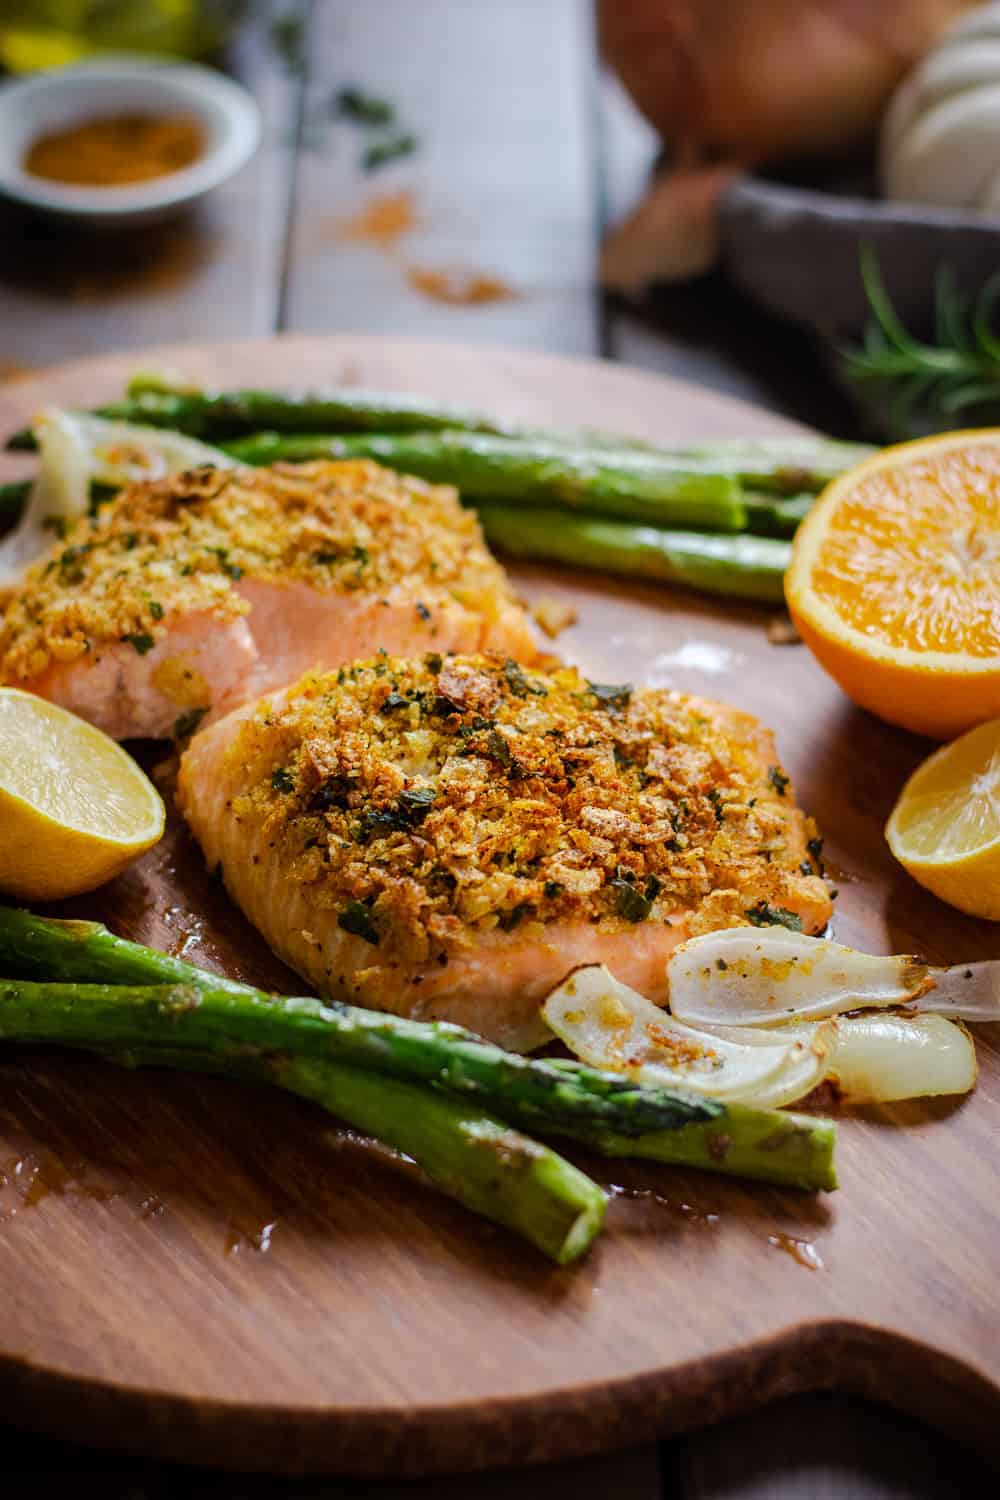 Best One Pan Baked Salmon Recipe with Herb Crust (Gluten Free) | One Pan Dinners | Quick Dinner Recipes | Easy Dinner Recipes | Healthy Dinner Recipes | Easy Salmon Dinner Recipes | Baked Salmon Recipe | Gluten Free Dinner Recipe || The Butter Half #glutenfree #easydinner #thebutterhalf